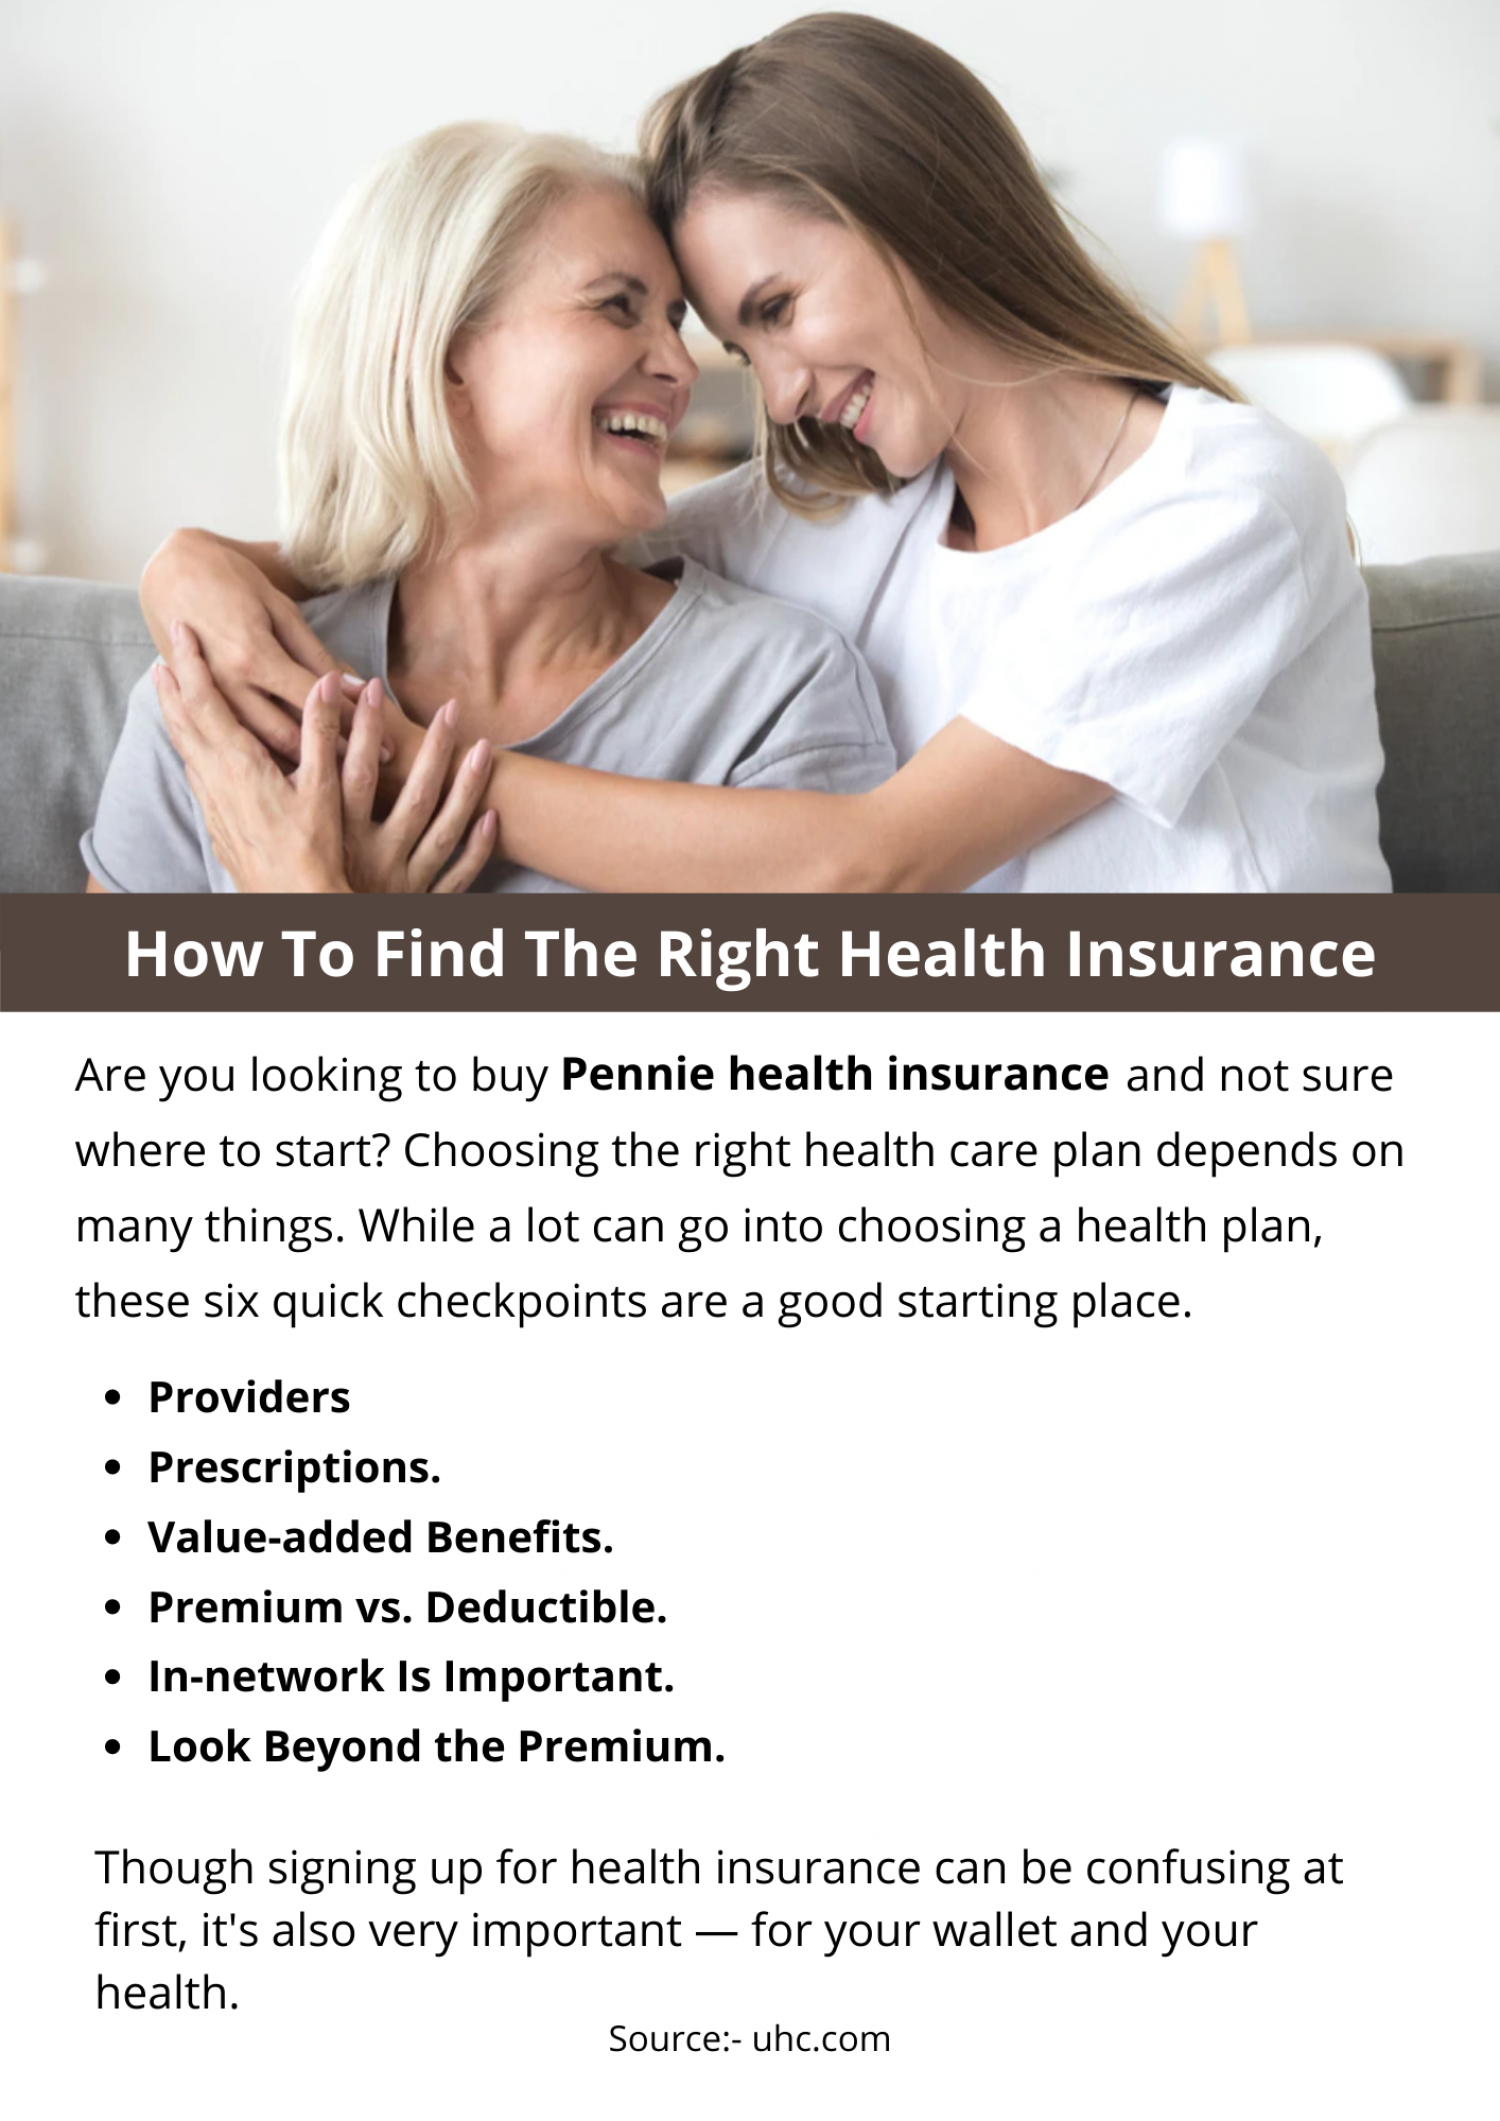 How To Find The Right Health Insurance Infographic